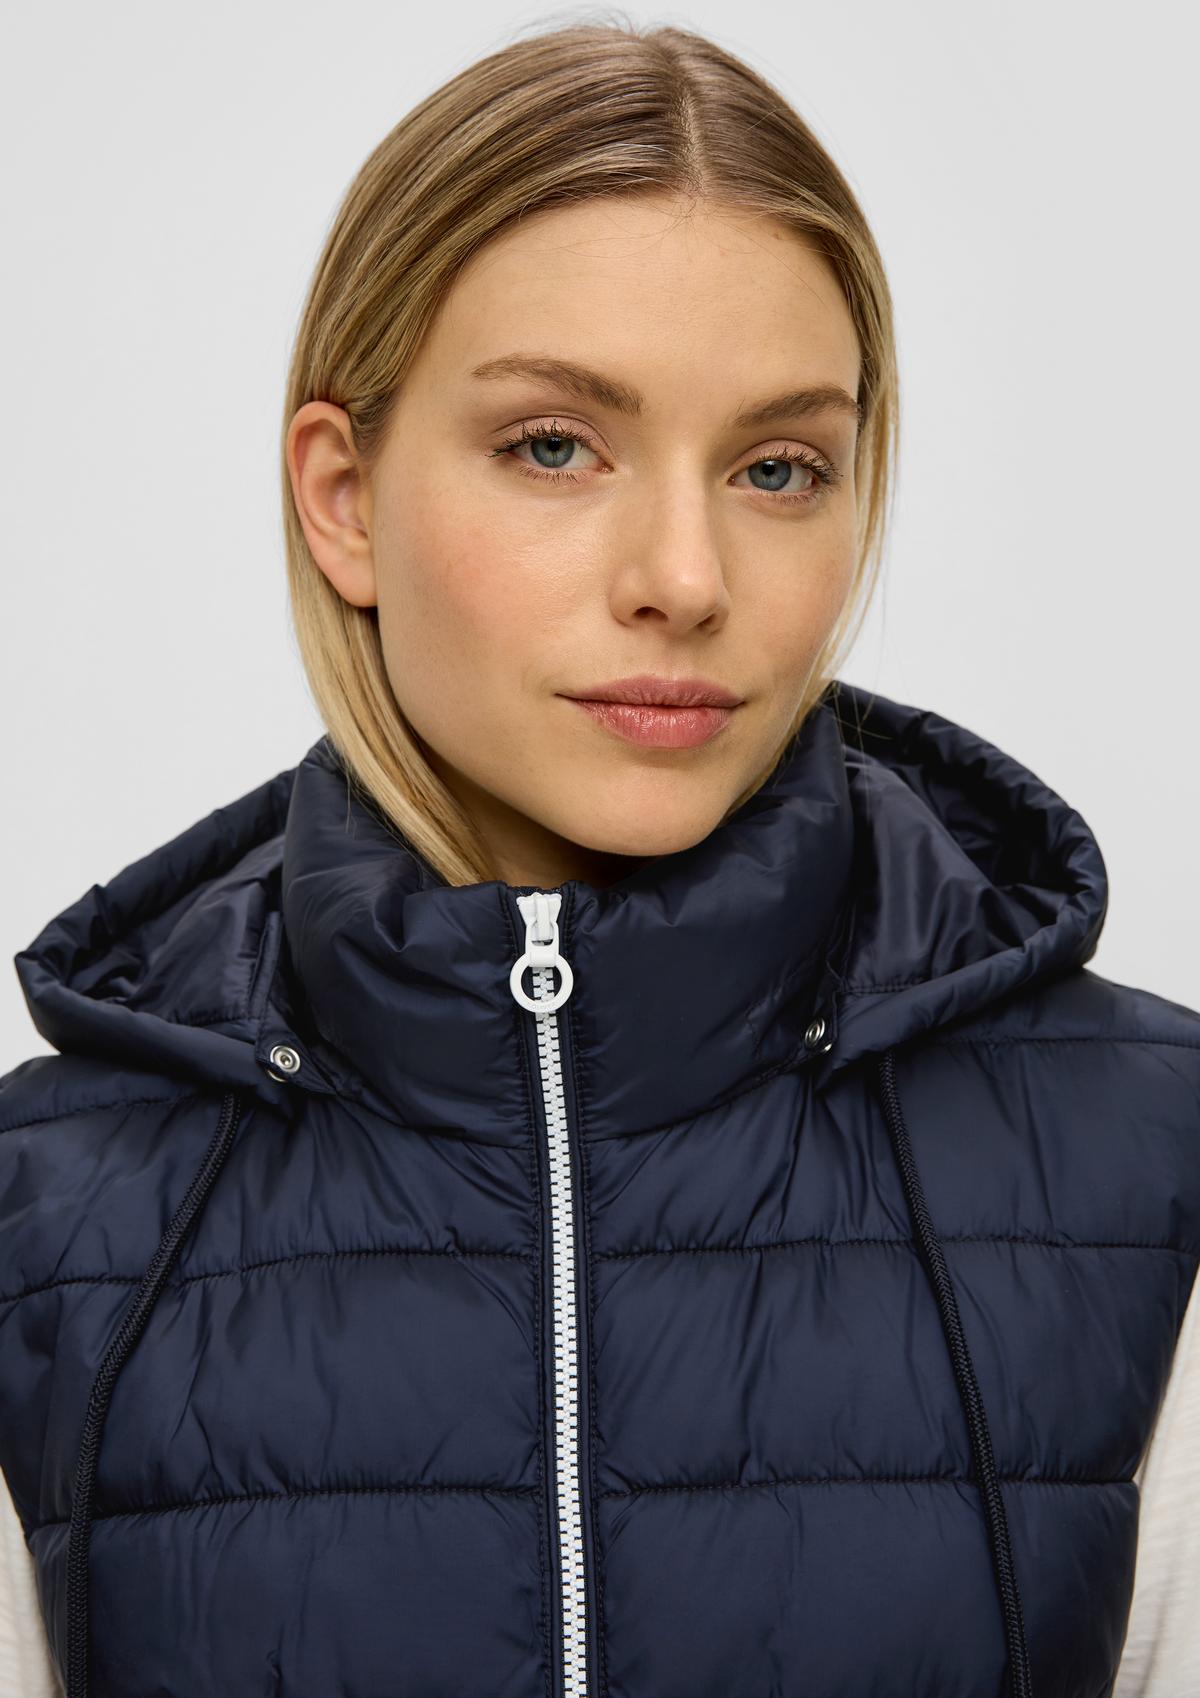 s.Oliver Long quilted body warmer with a detachable hood